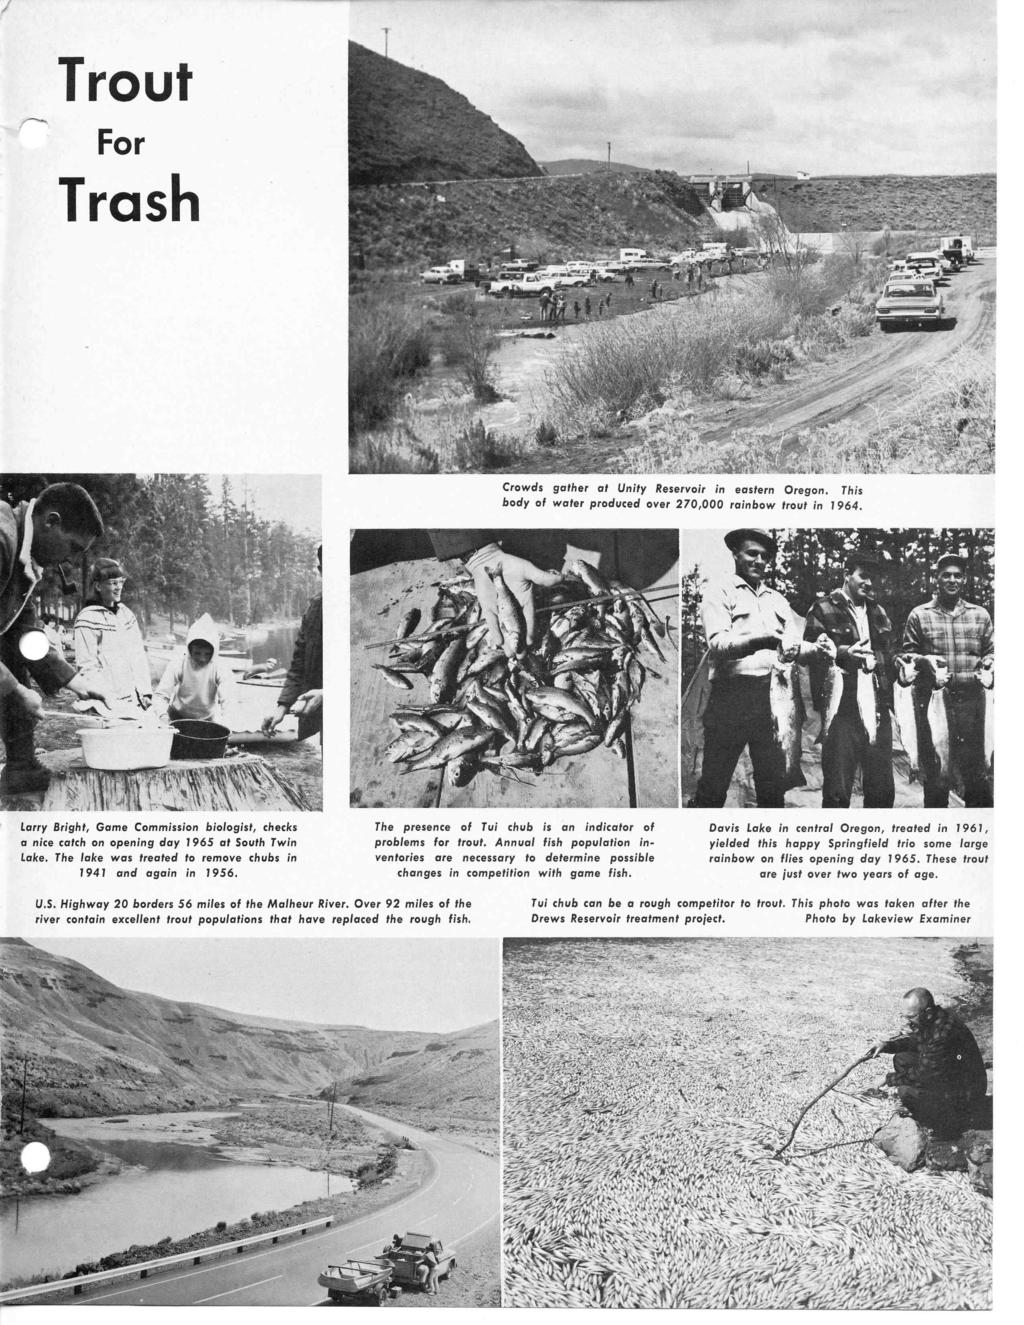 Trout For Trash Crowds gather at Unty Reservor n eastern Oregon. Ths body of water produced over 270,000 ranbow trout n 1964.